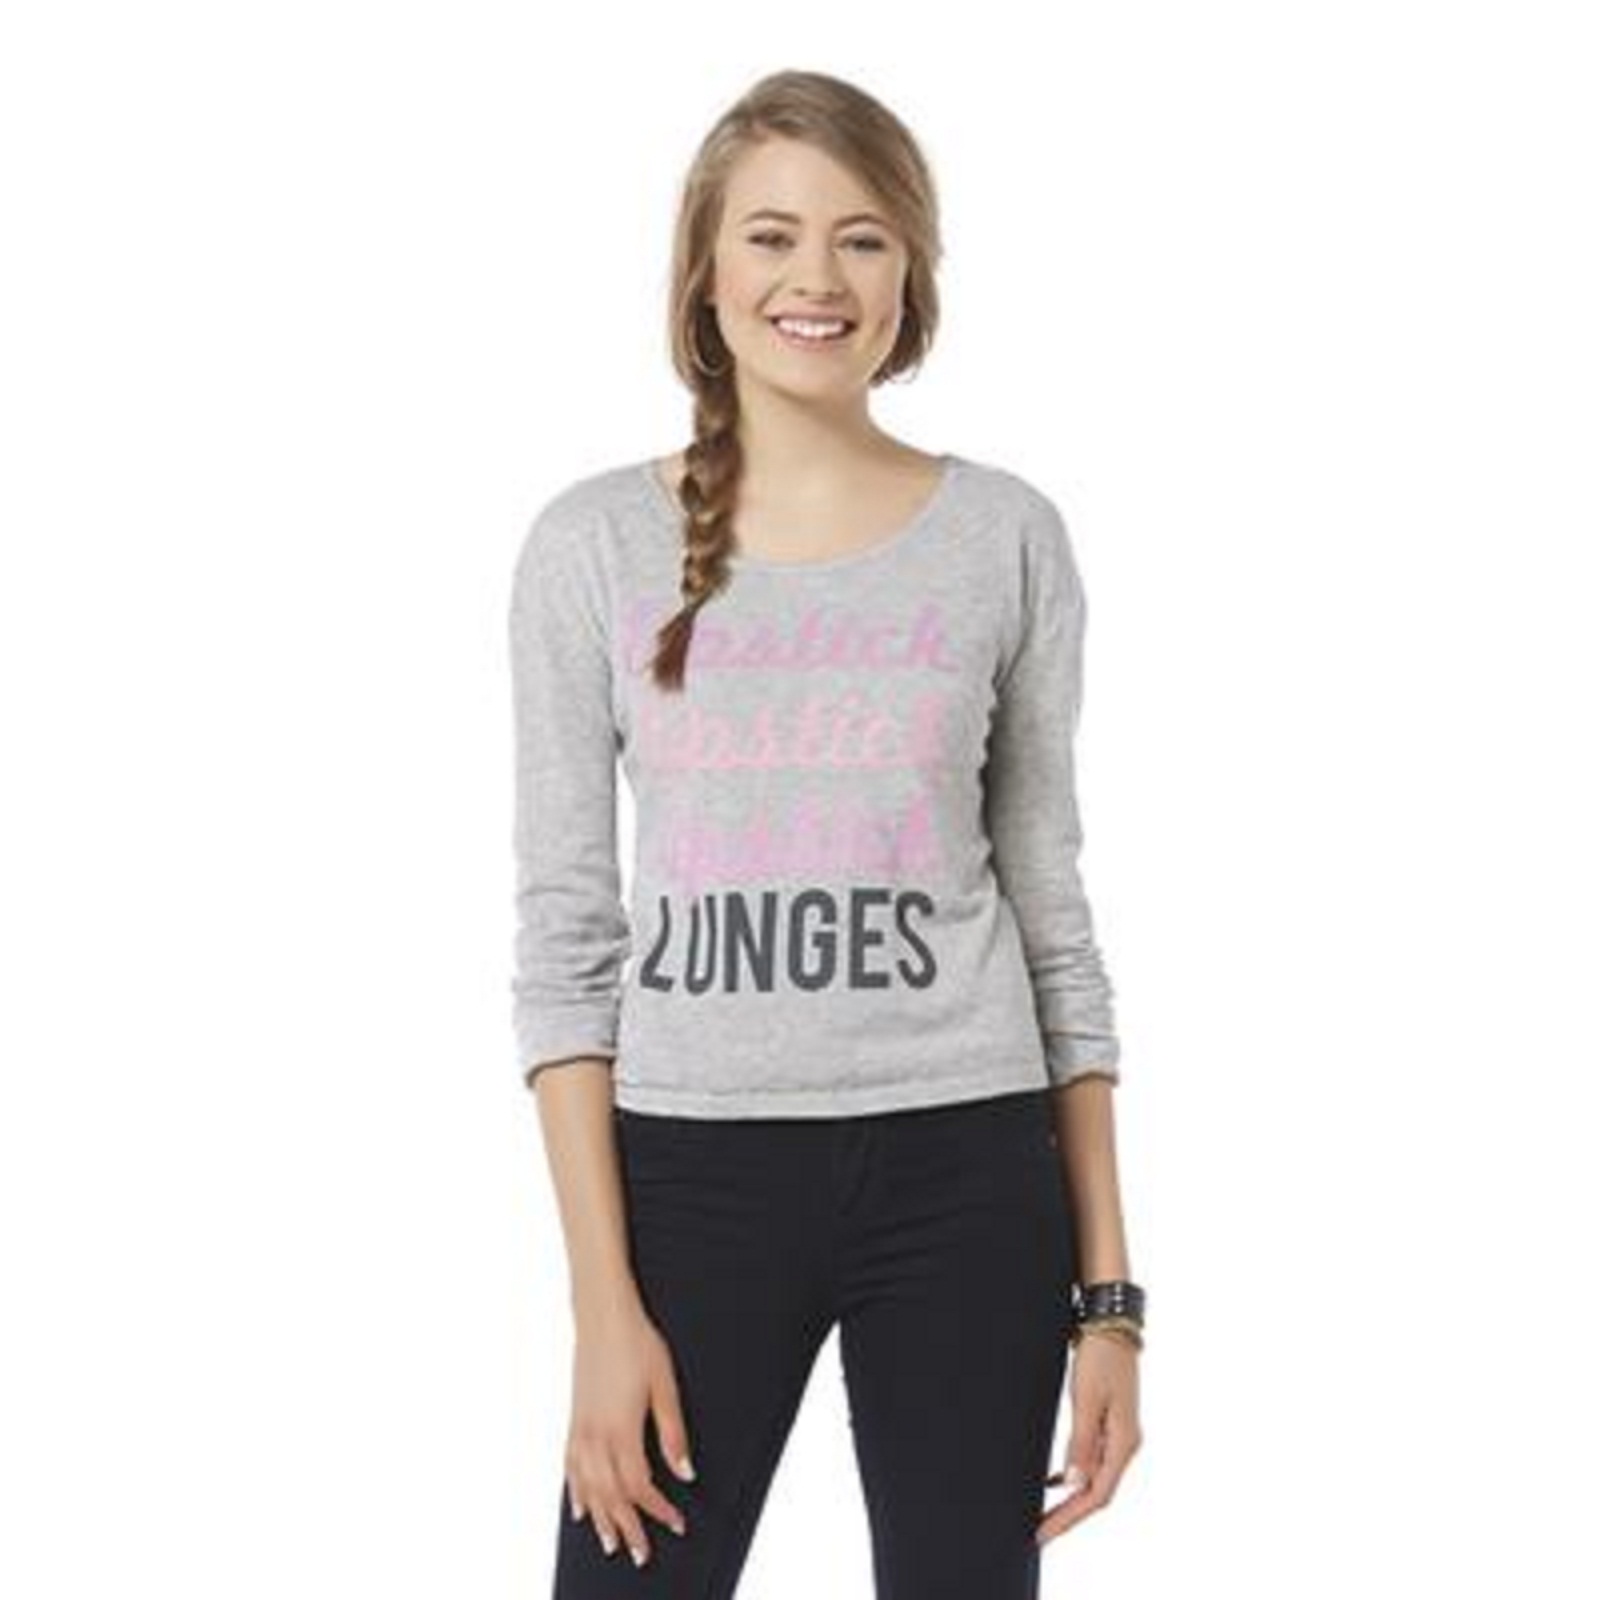 5th Sun Junior's Long-Sleeve Top - Lunges